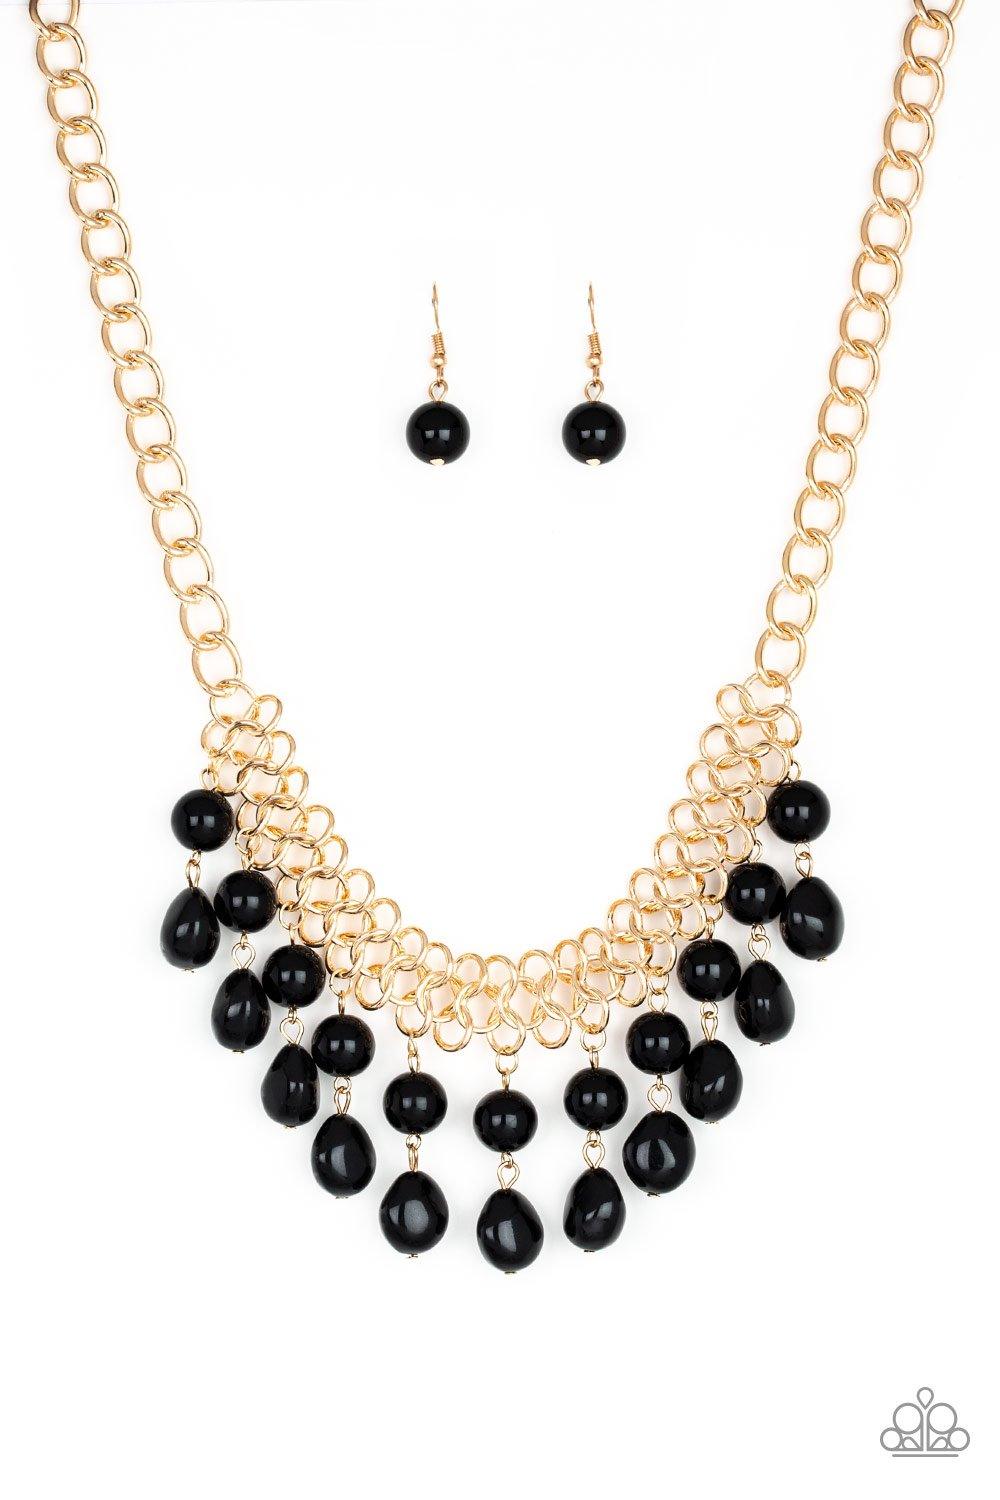 Paparazzi Accessories 5th Avenue Fleek - Black A collection of classic and imperfect black beads dangle from a web of interlocking gold links below the collar, adding a modern twist to the timeless palette. Features an adjustable clasp closure. Sold as on